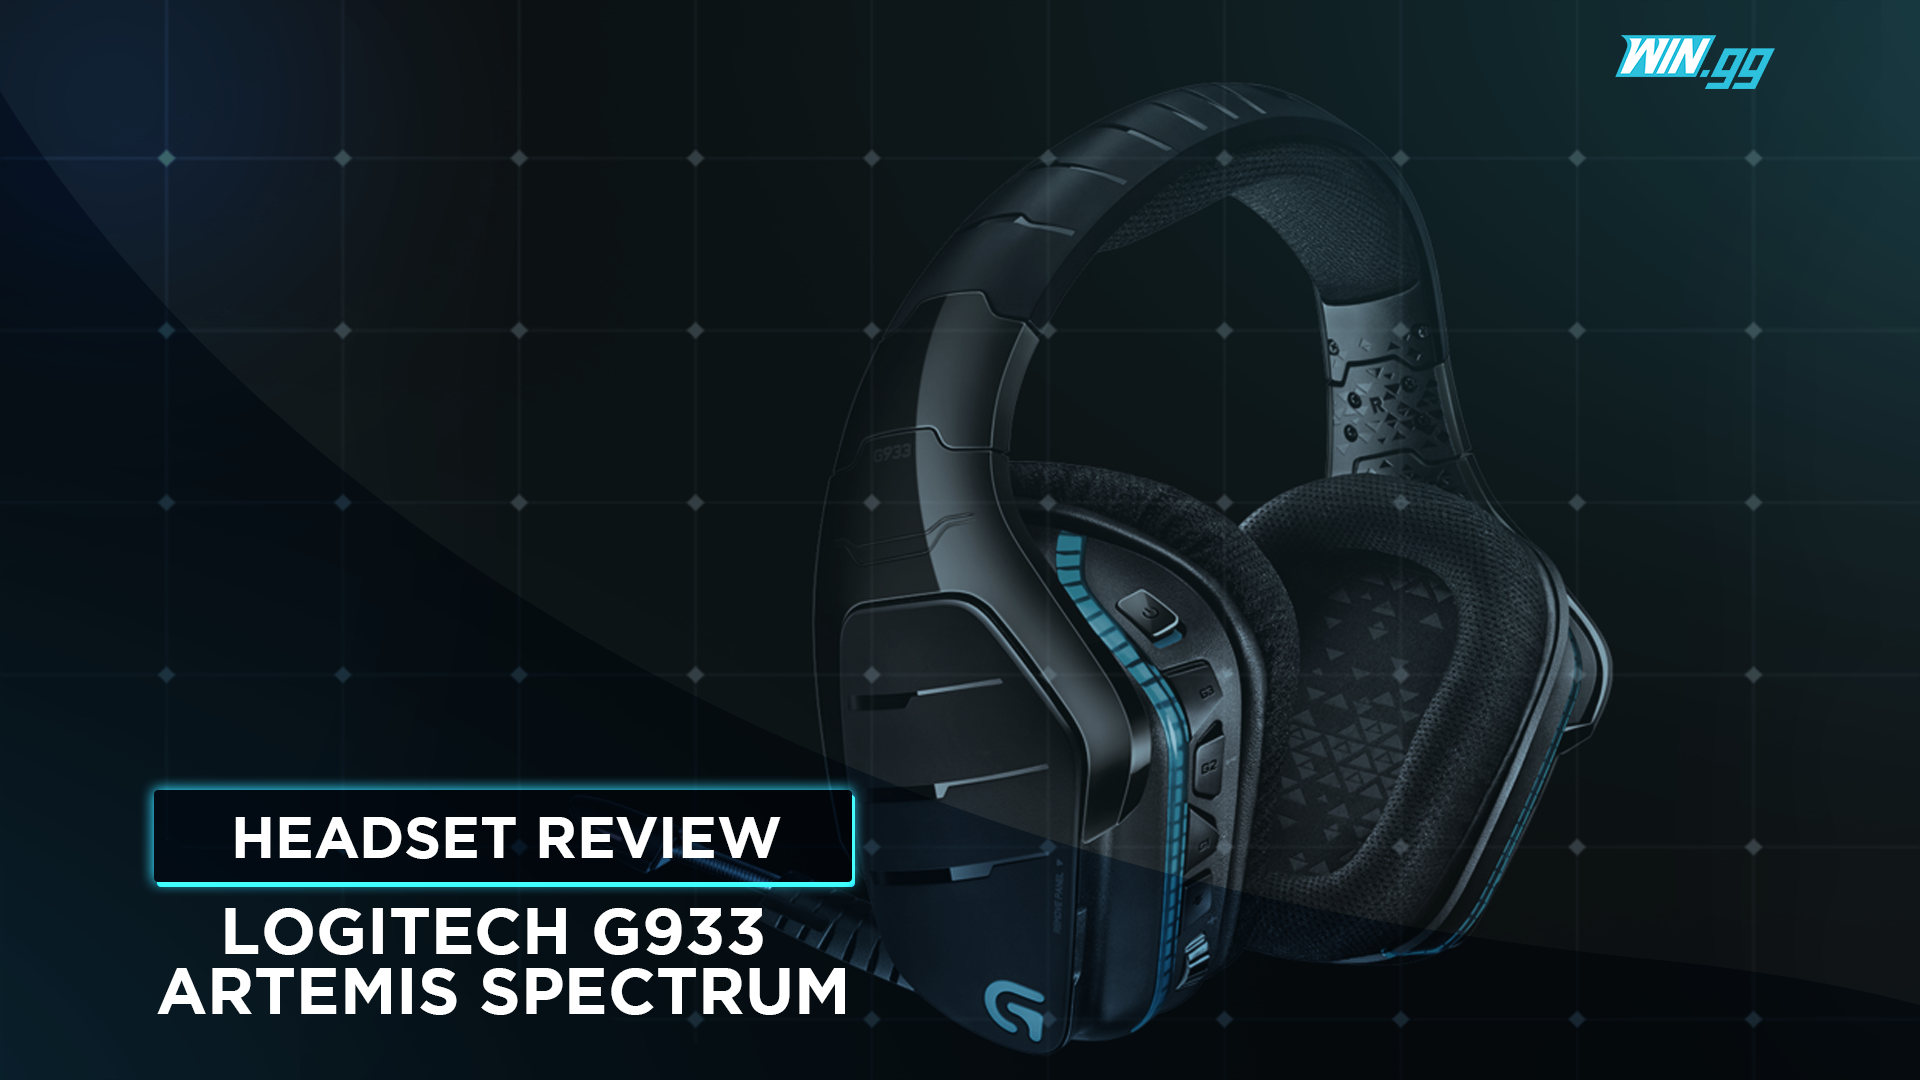 duft gardin Tag telefonen Our two-year review of the Artemis Spectrum gaming headset - WIN.gg